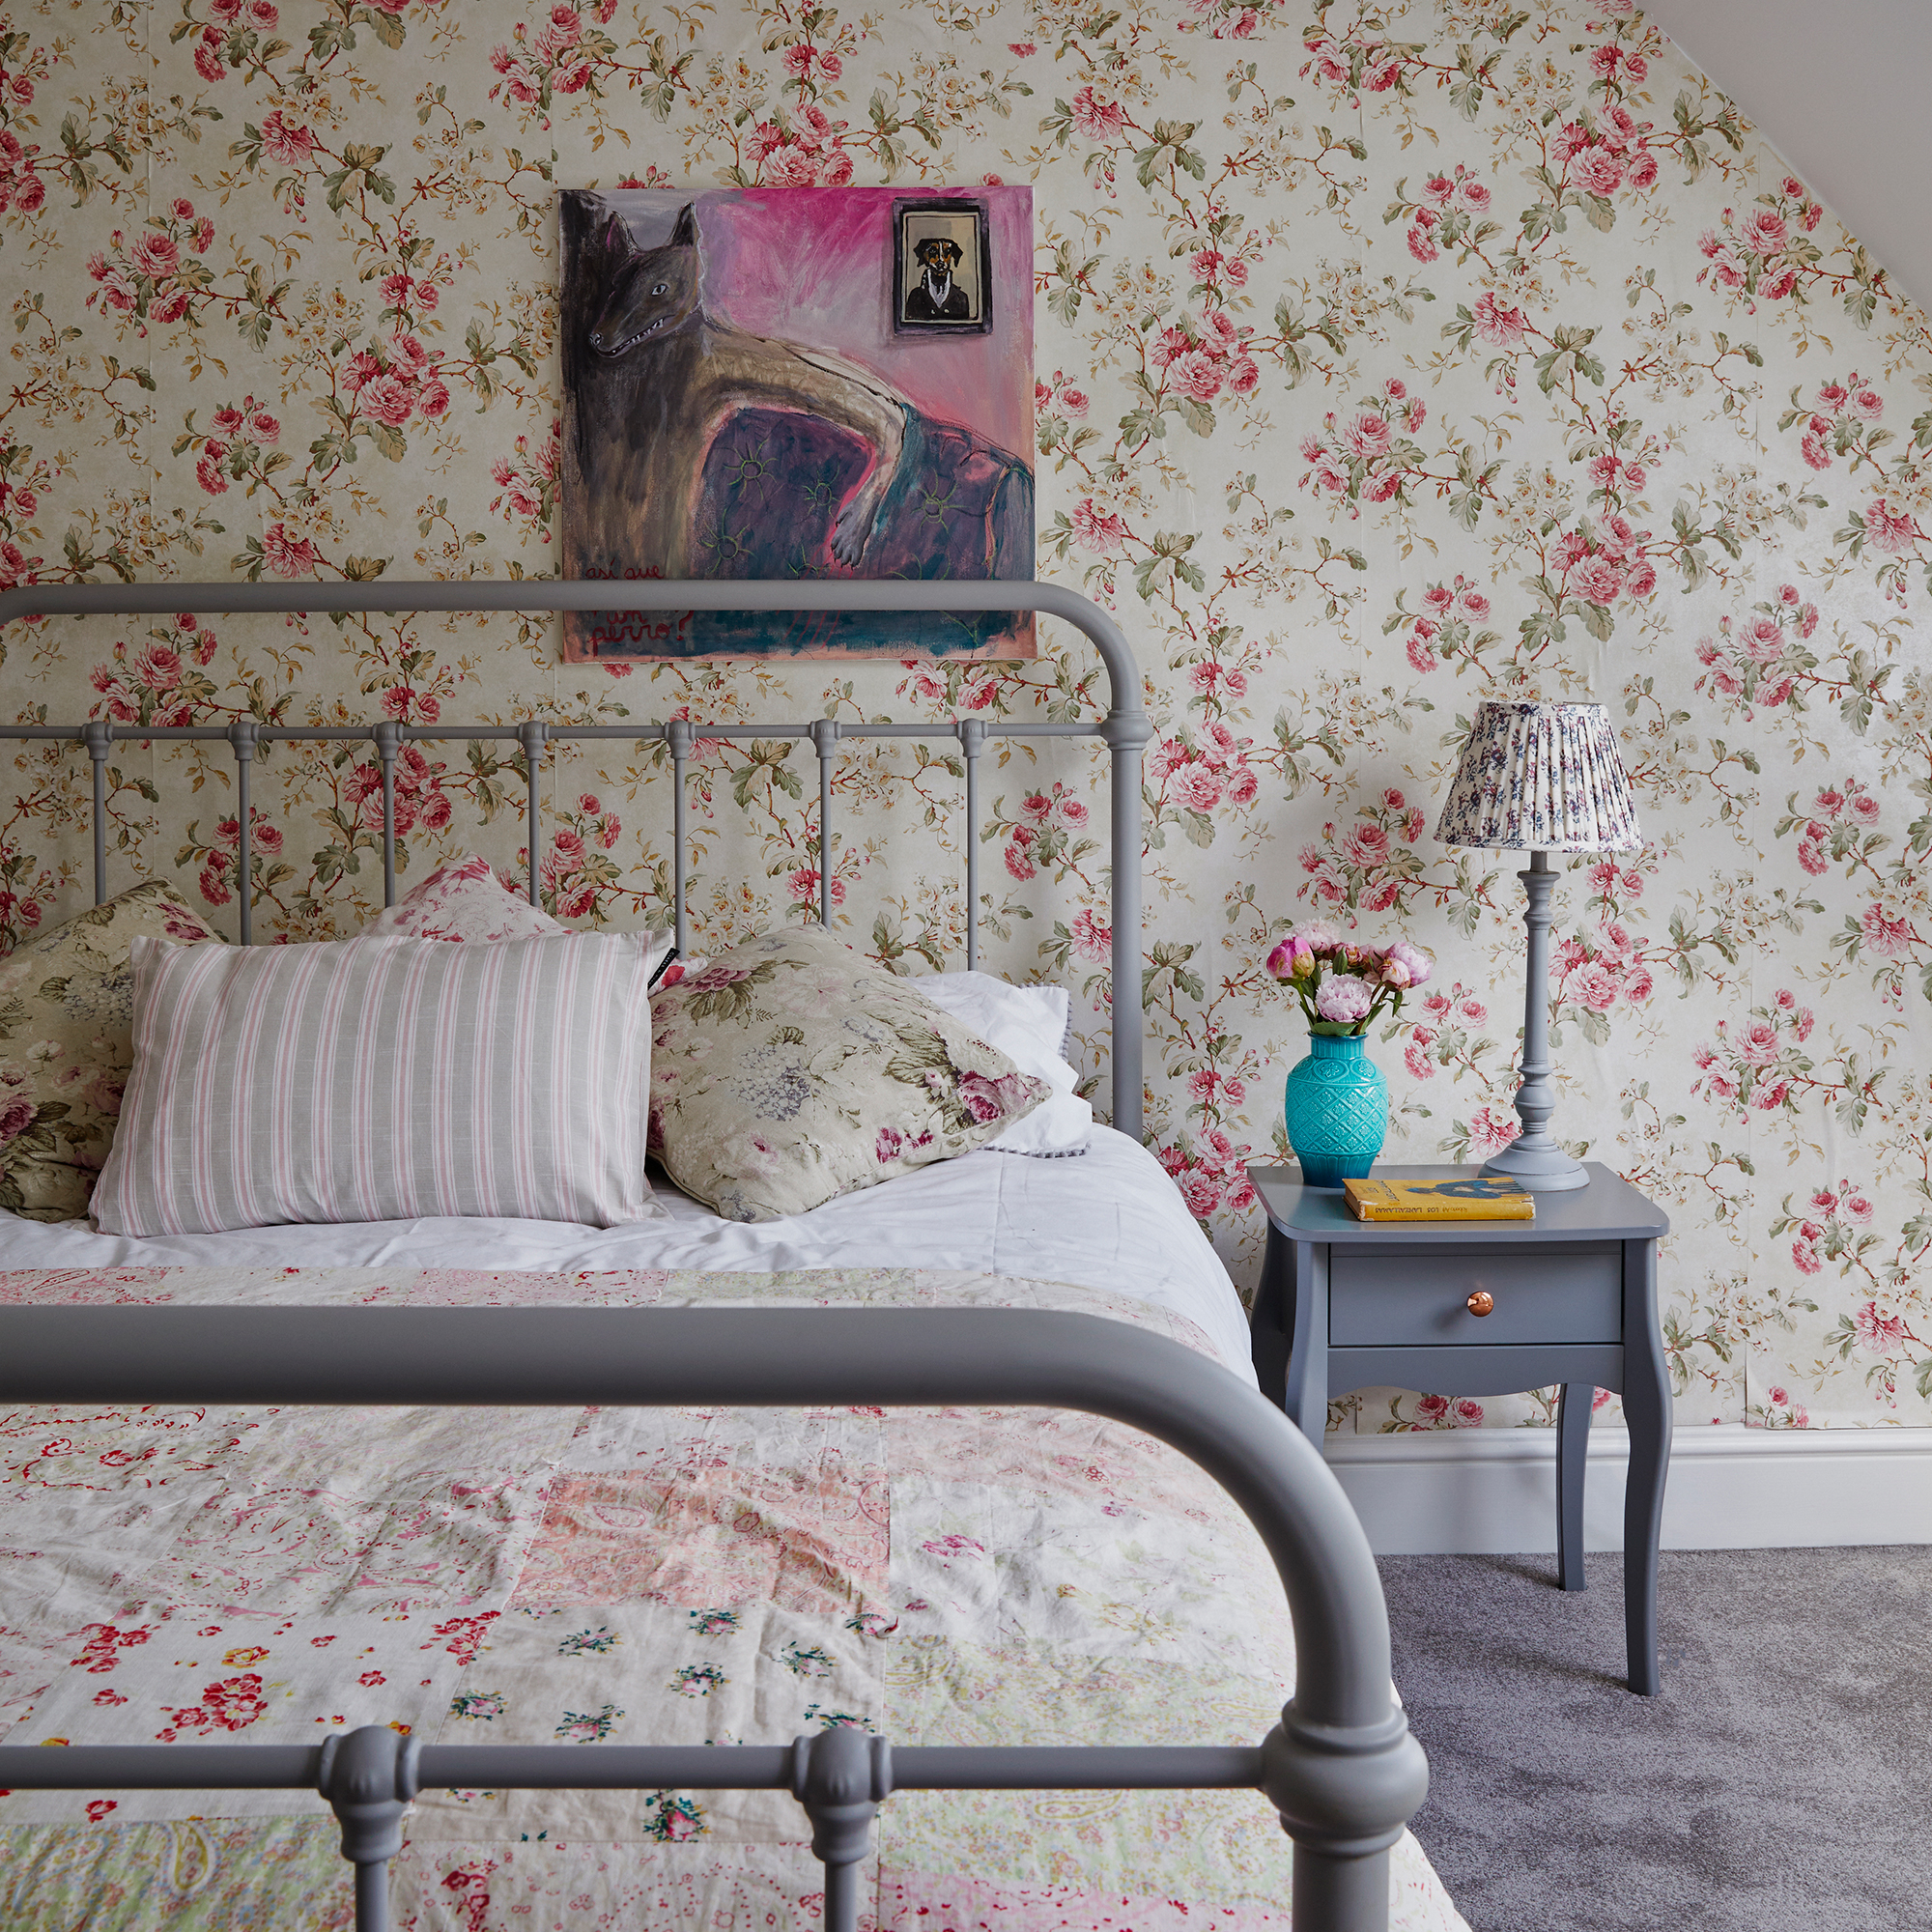 vintage style bedroom with floral wallpaper and grey painted metal bedstead